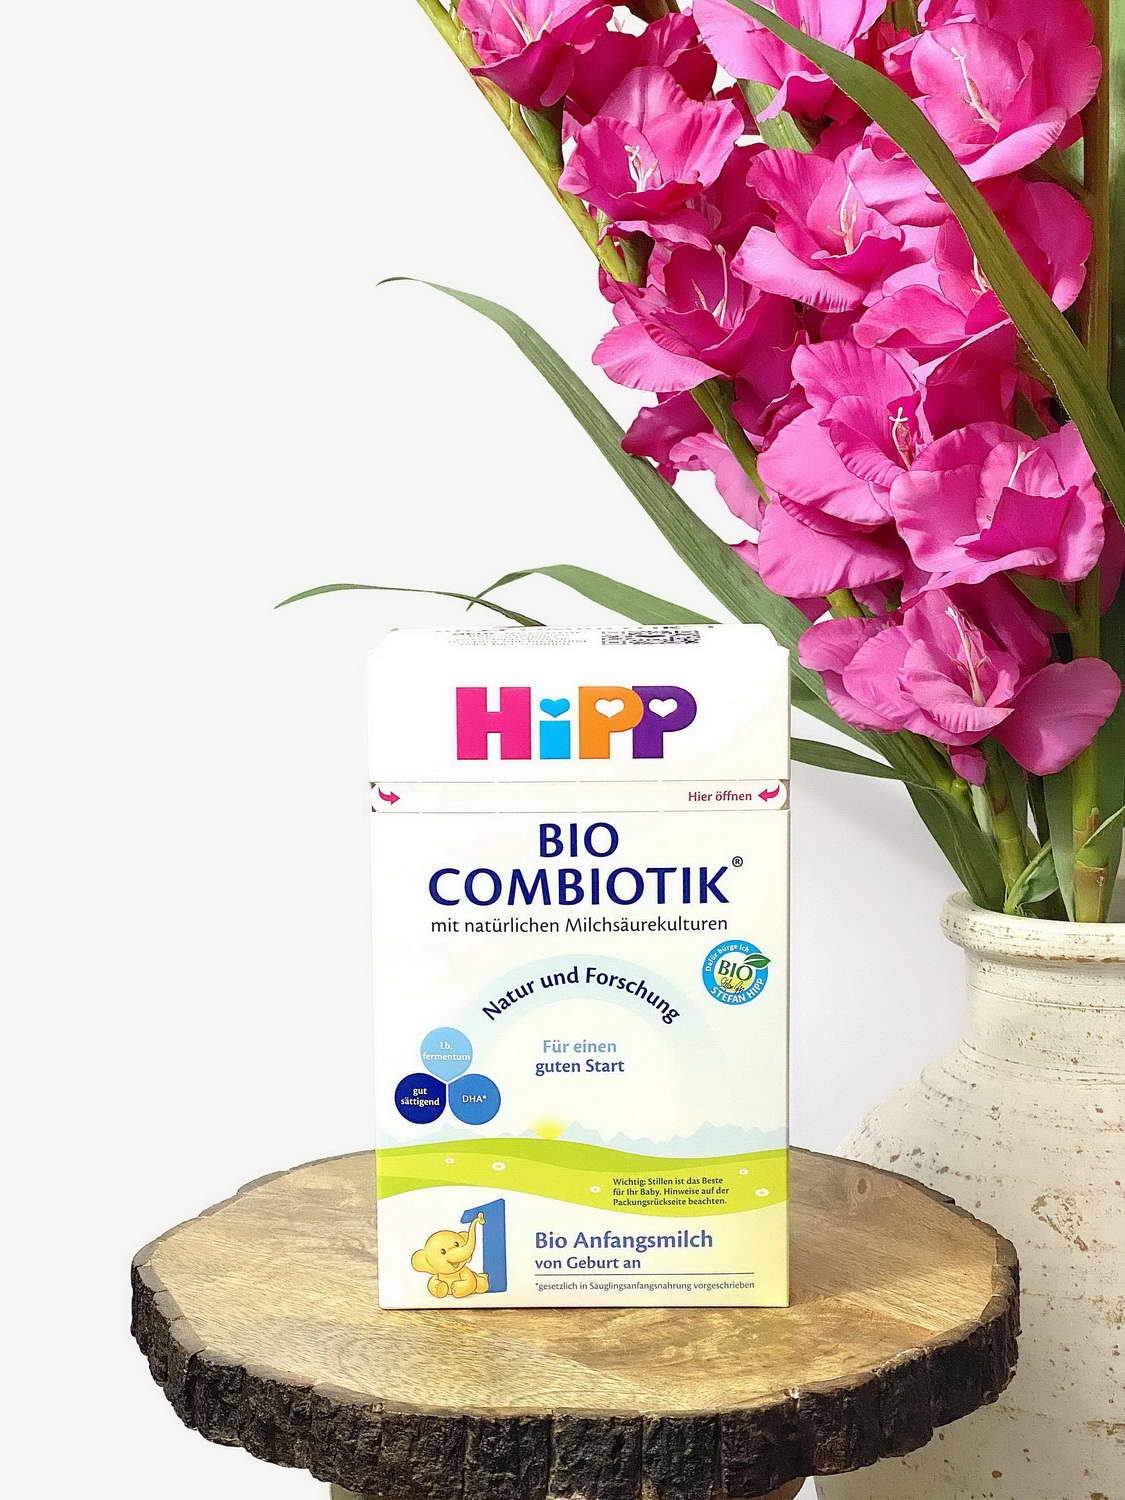 HiPP Stage 1 COMBIOTIC ORGANIC Baby Formula from DAY 1-550g FREE Shipping  3PACK